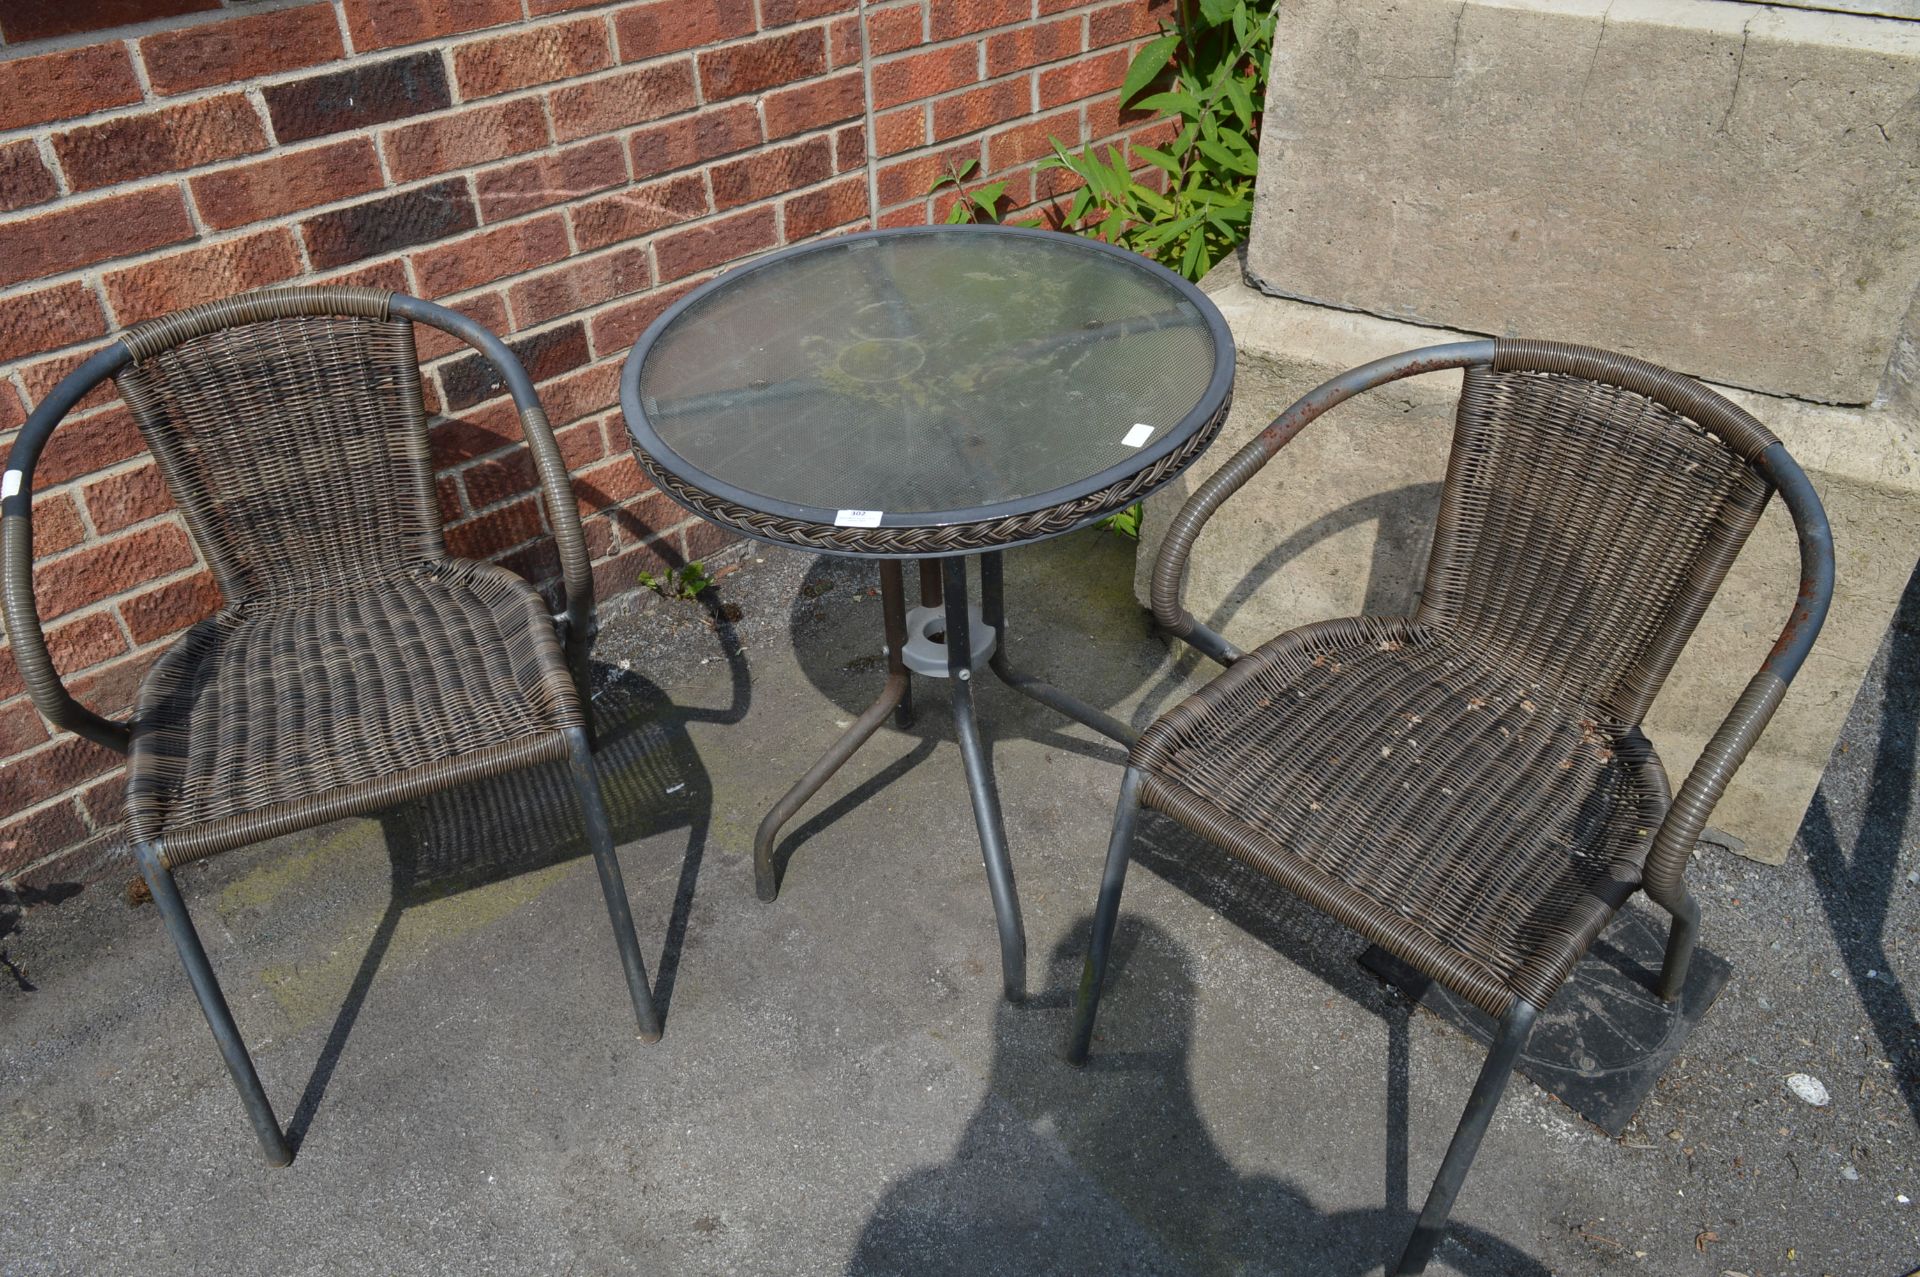 Tubular Metal Circular Topped Garden Table with Two Chairs